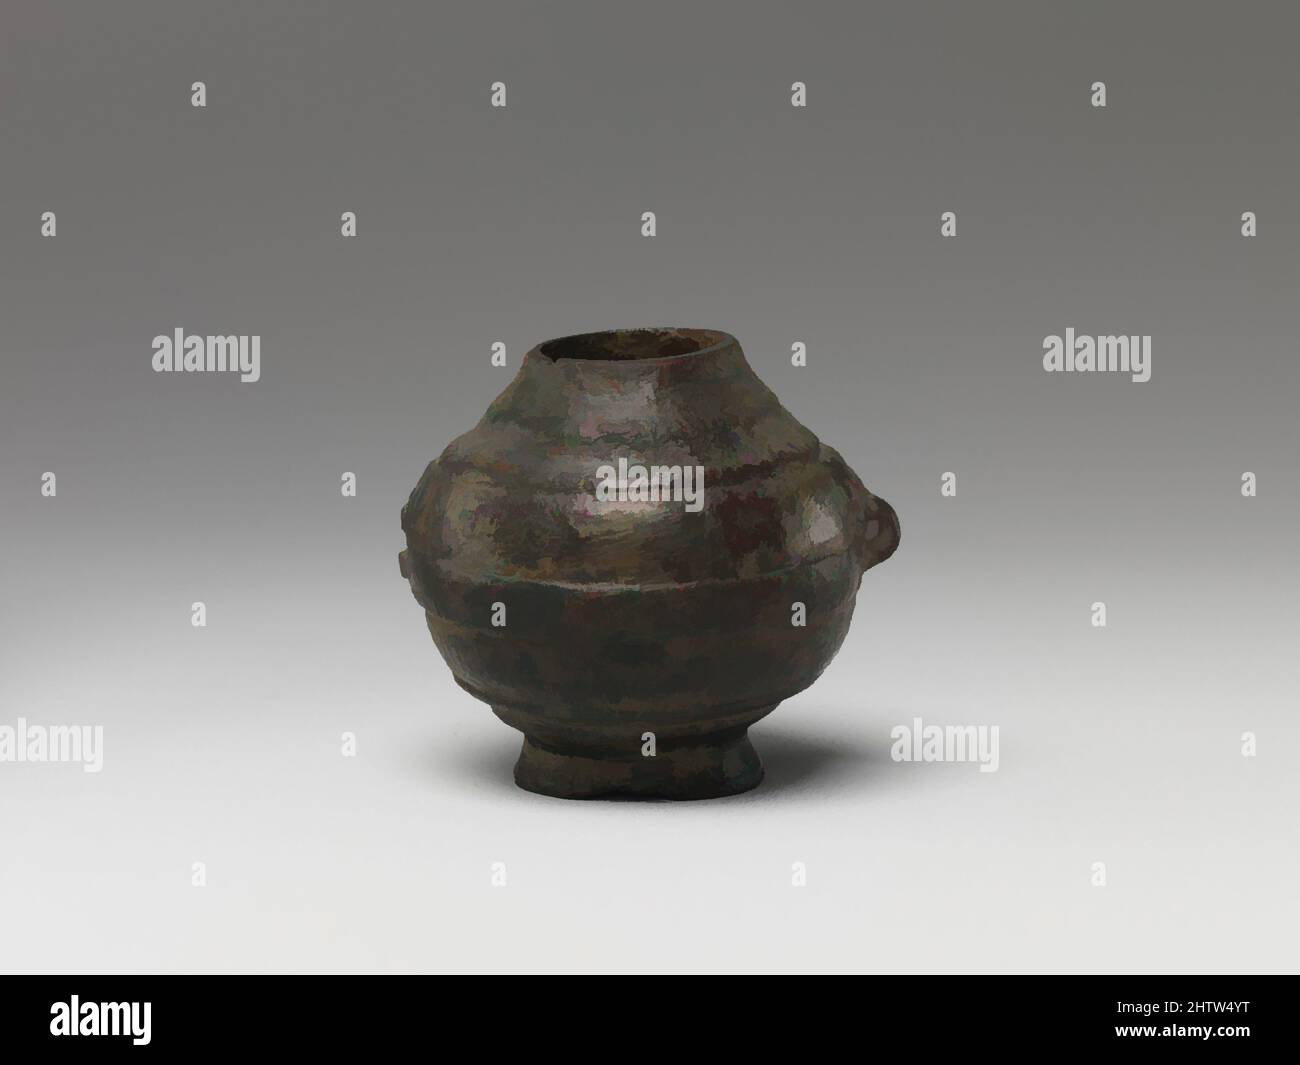 Art inspired by Wine Jar, Han dynasty (206 B.C.–A.D. 220), China, Bronze, H. 2 in. (5.1 cm), Metalwork, Classic works modernized by Artotop with a splash of modernity. Shapes, color and value, eye-catching visual impact on art. Emotions through freedom of artworks in a contemporary way. A timeless message pursuing a wildly creative new direction. Artists turning to the digital medium and creating the Artotop NFT Stock Photo